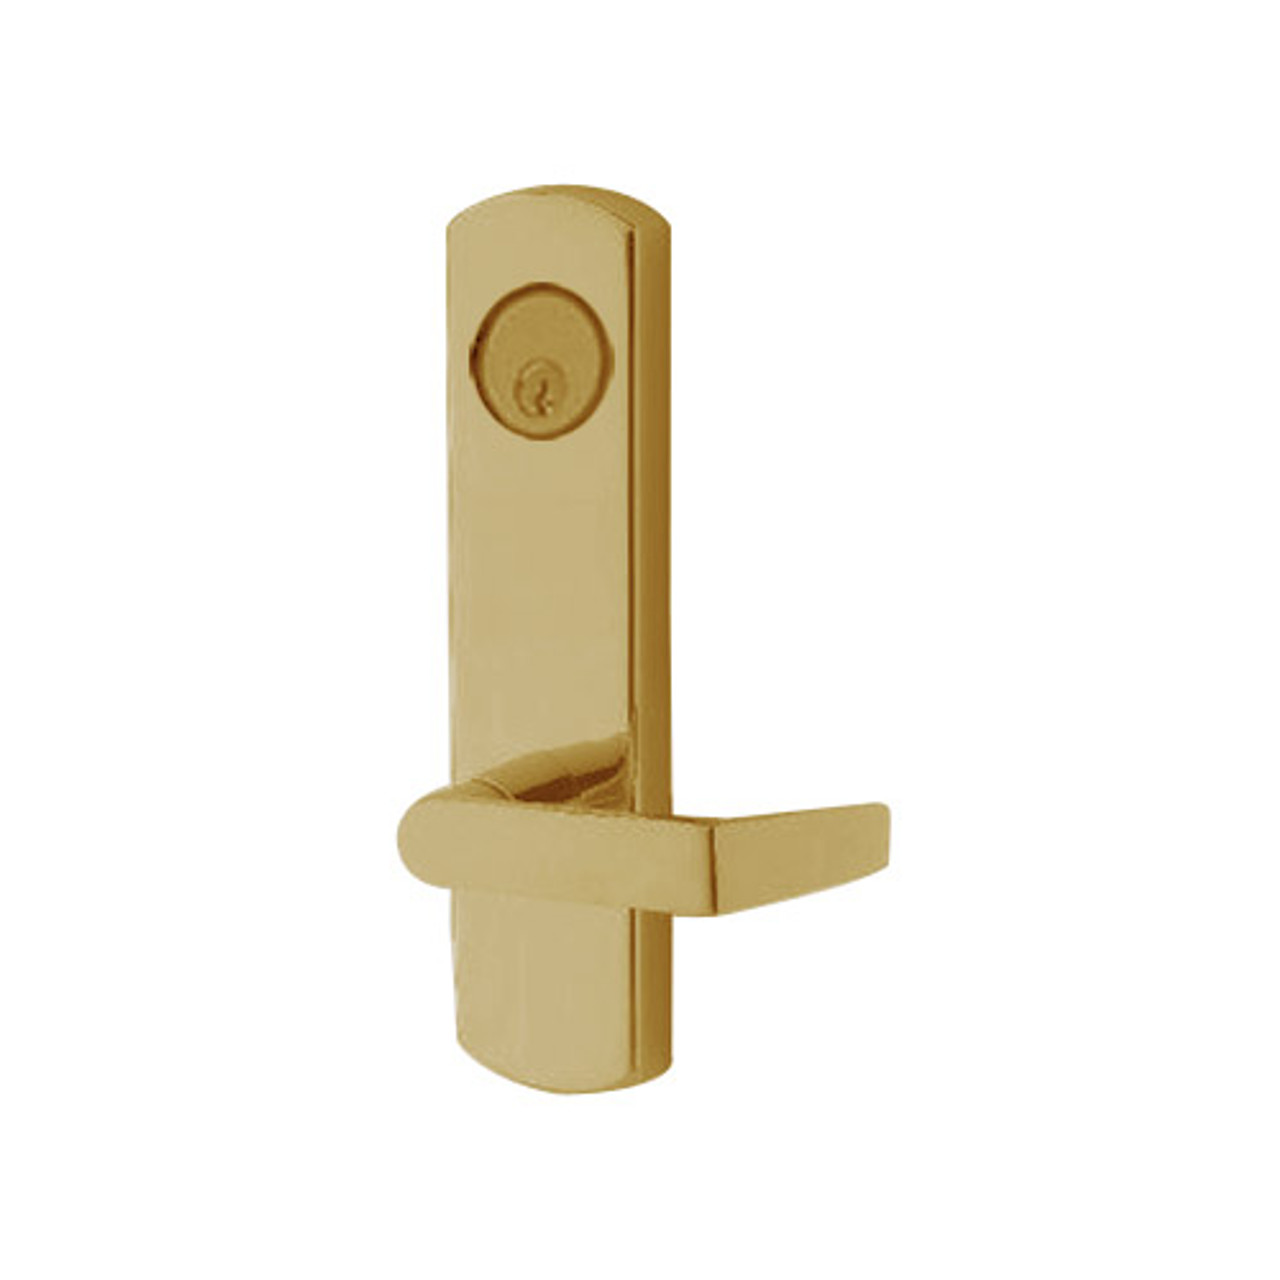 3080E-03-0-93-55 US4 Adams Rite Electrified Entry Trim with Square Lever in Satin Brass Finish